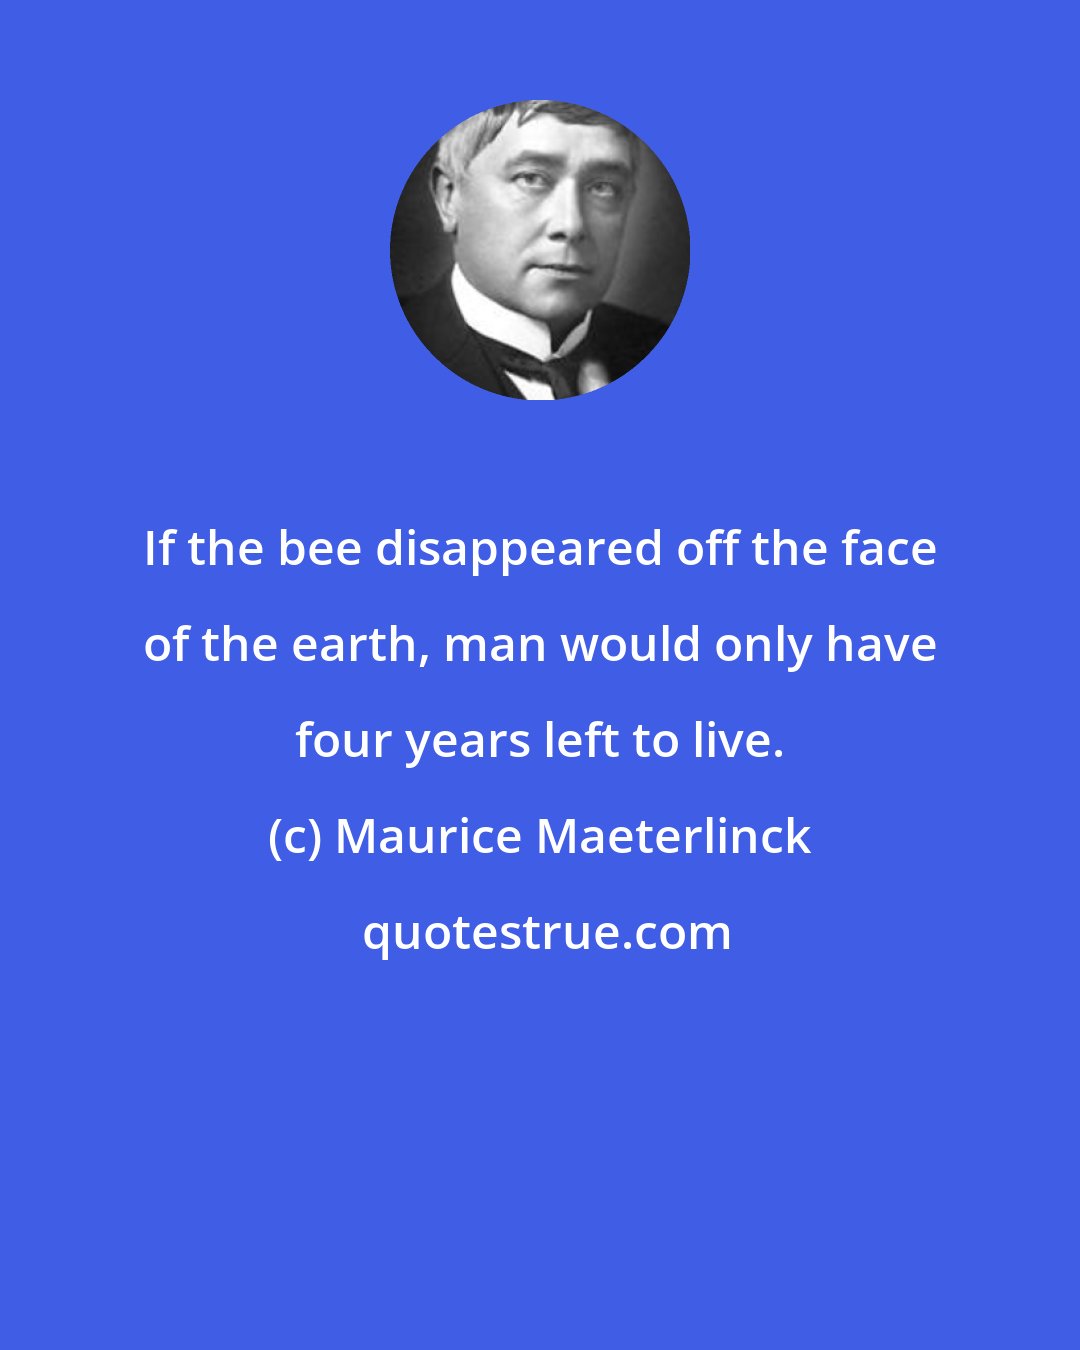 Maurice Maeterlinck: If the bee disappeared off the face of the earth, man would only have four years left to live.